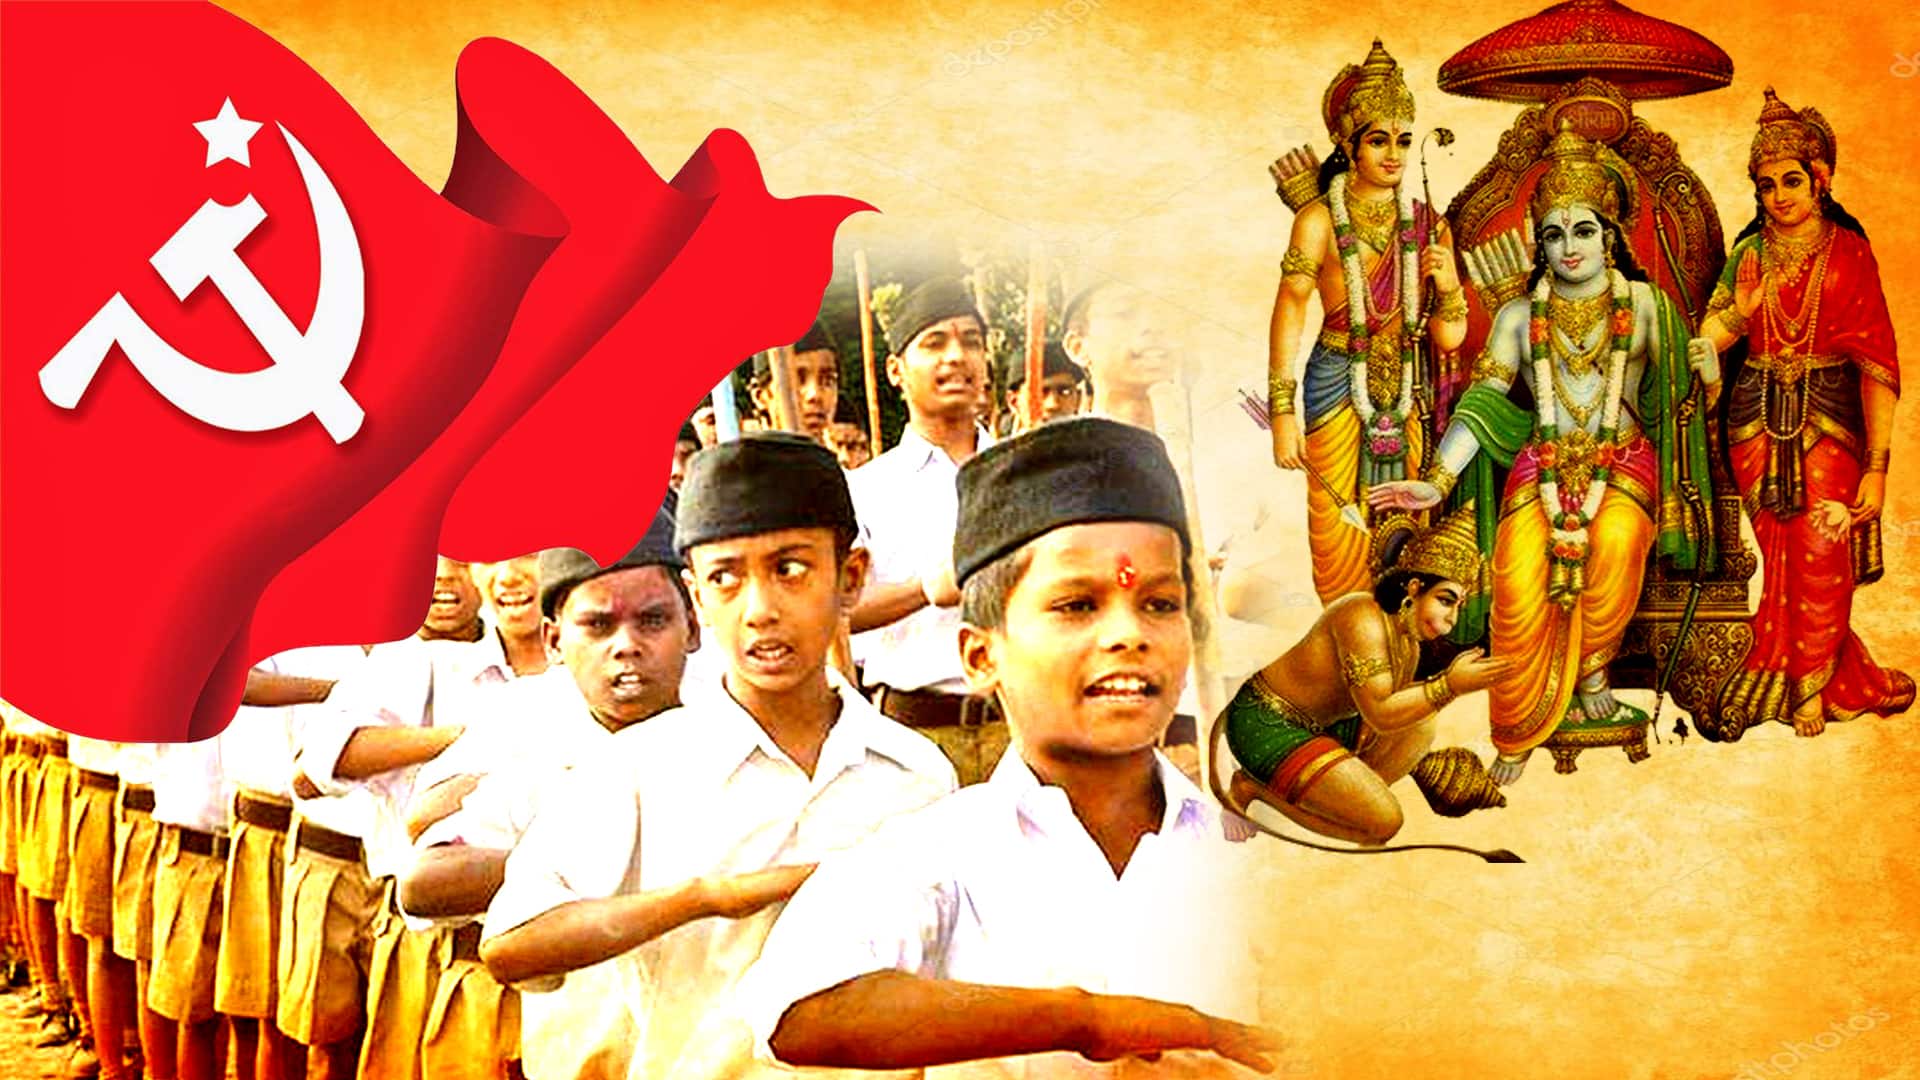 CPM plans Ramayana month to counter BJP’s rise